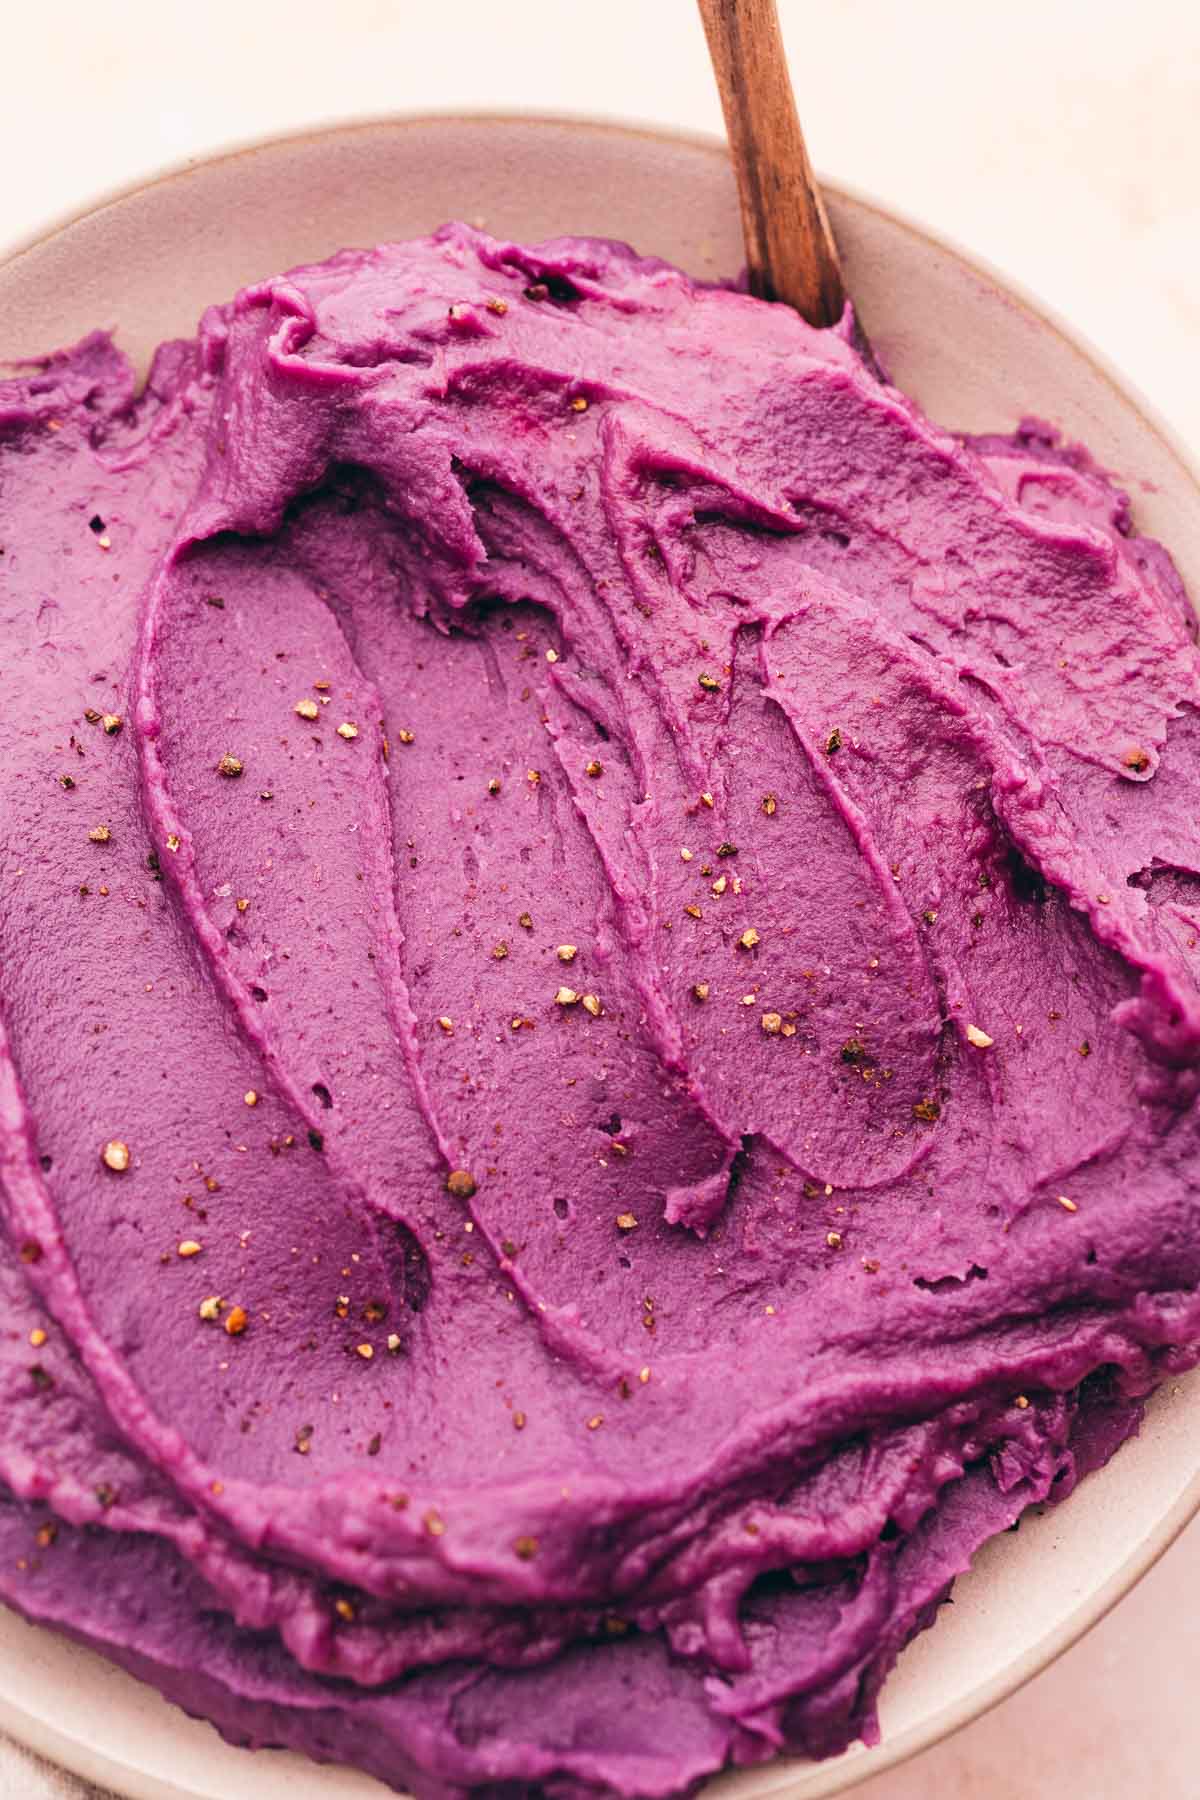 Mashed purple sweet potatoes hummus in a bowl with a wooden spoon.